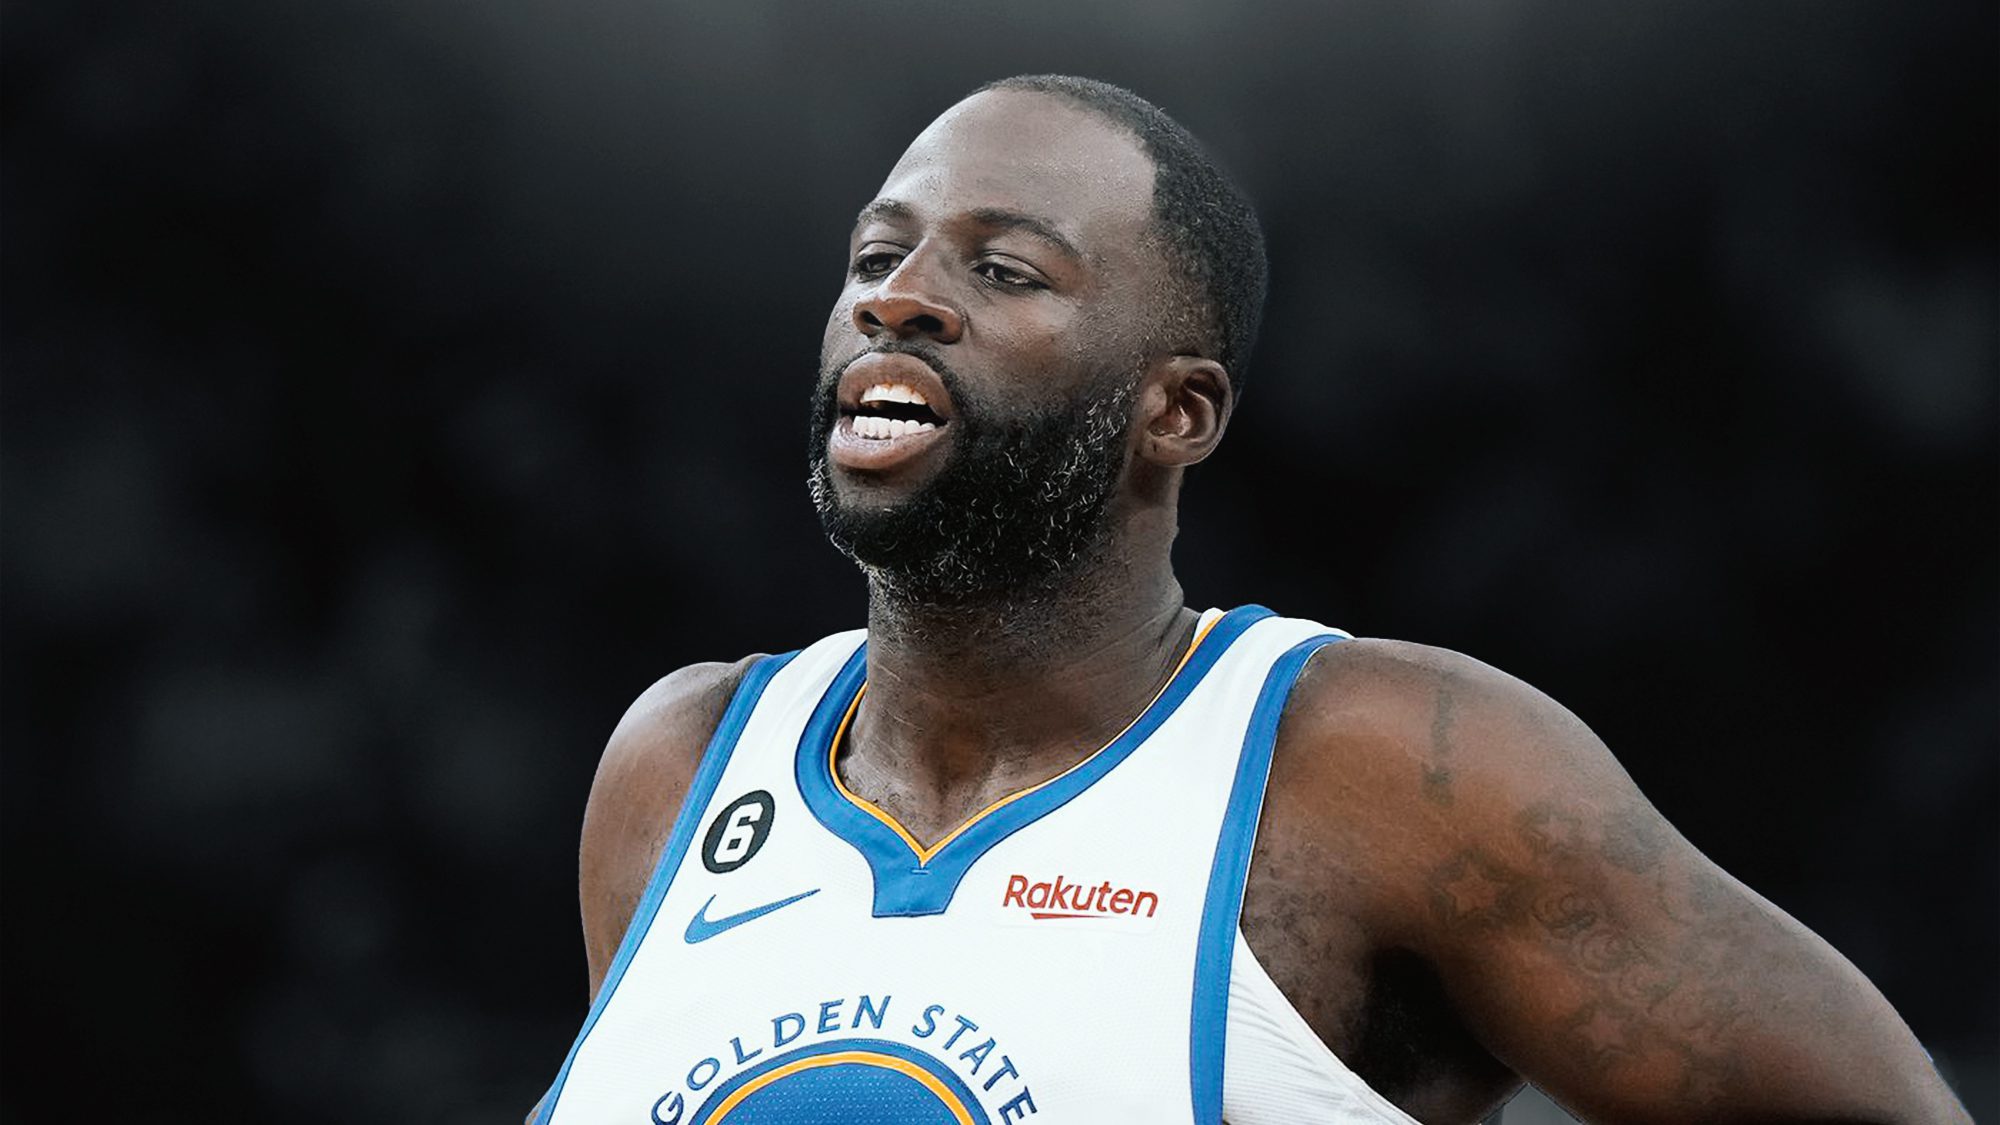 Draymond Says His Stats Are Low Because Scorekeepers Are Shortchanging Him